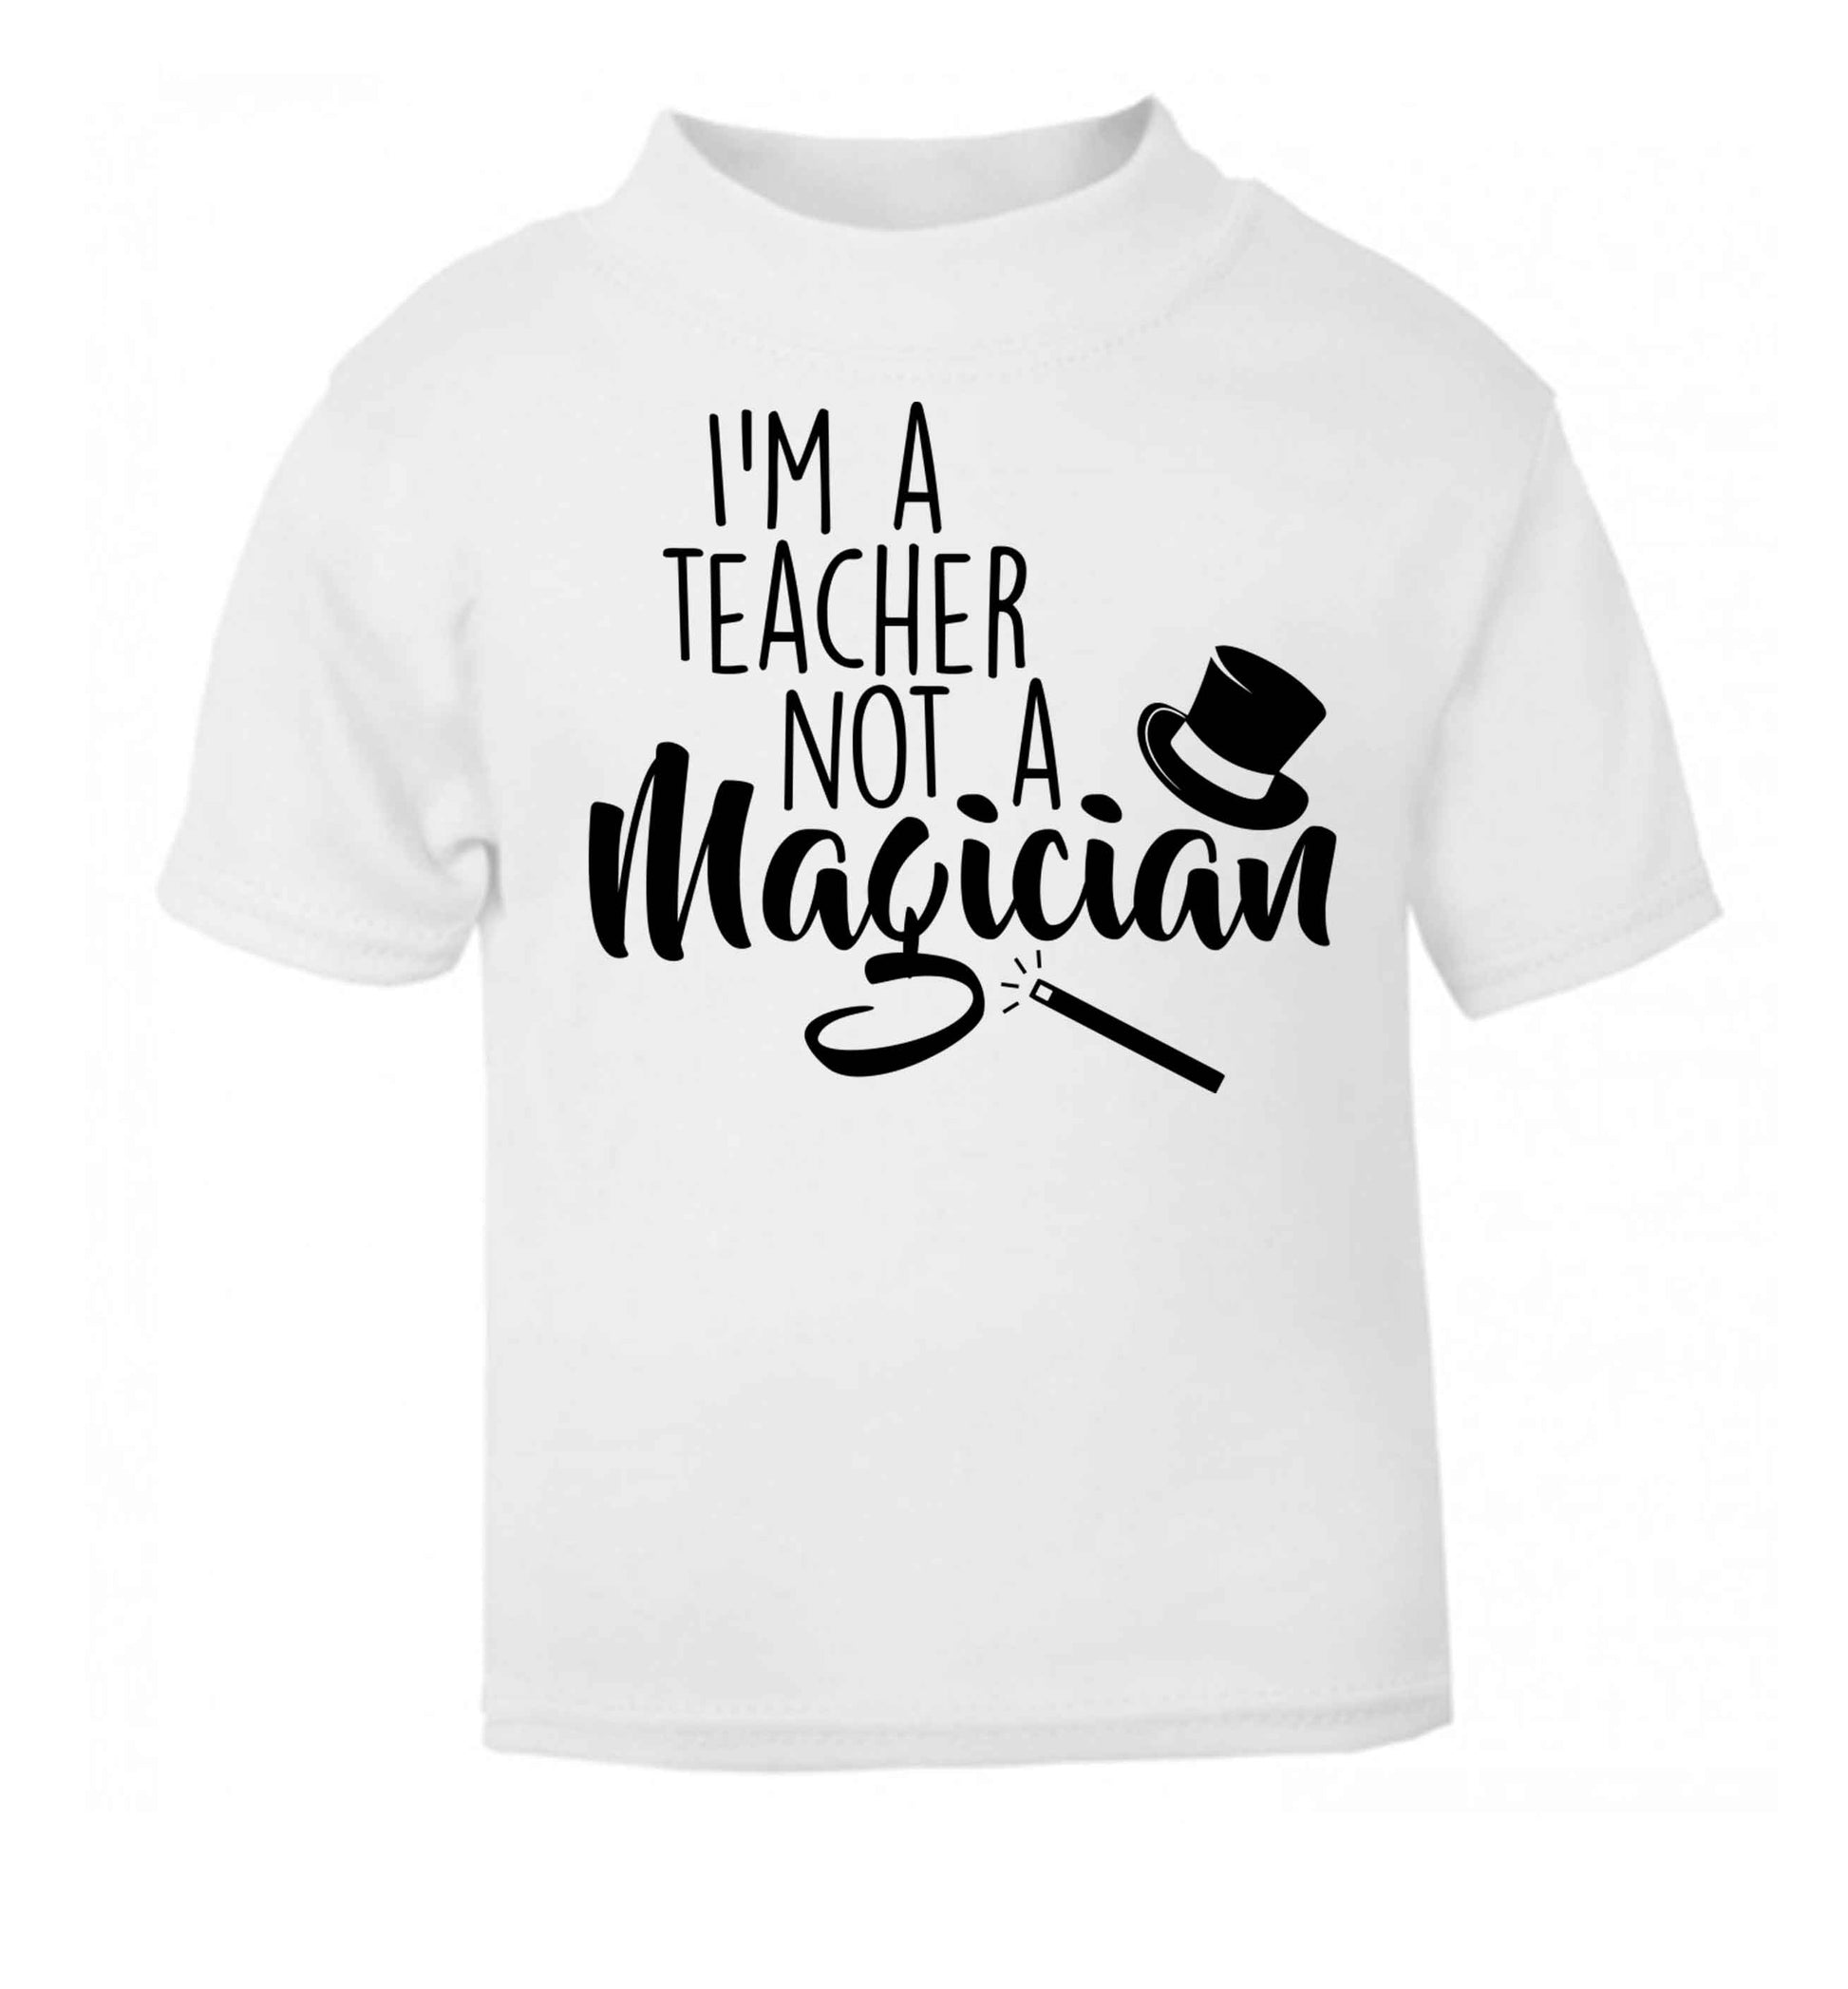 I'm a teacher not a magician white baby toddler Tshirt 2 Years